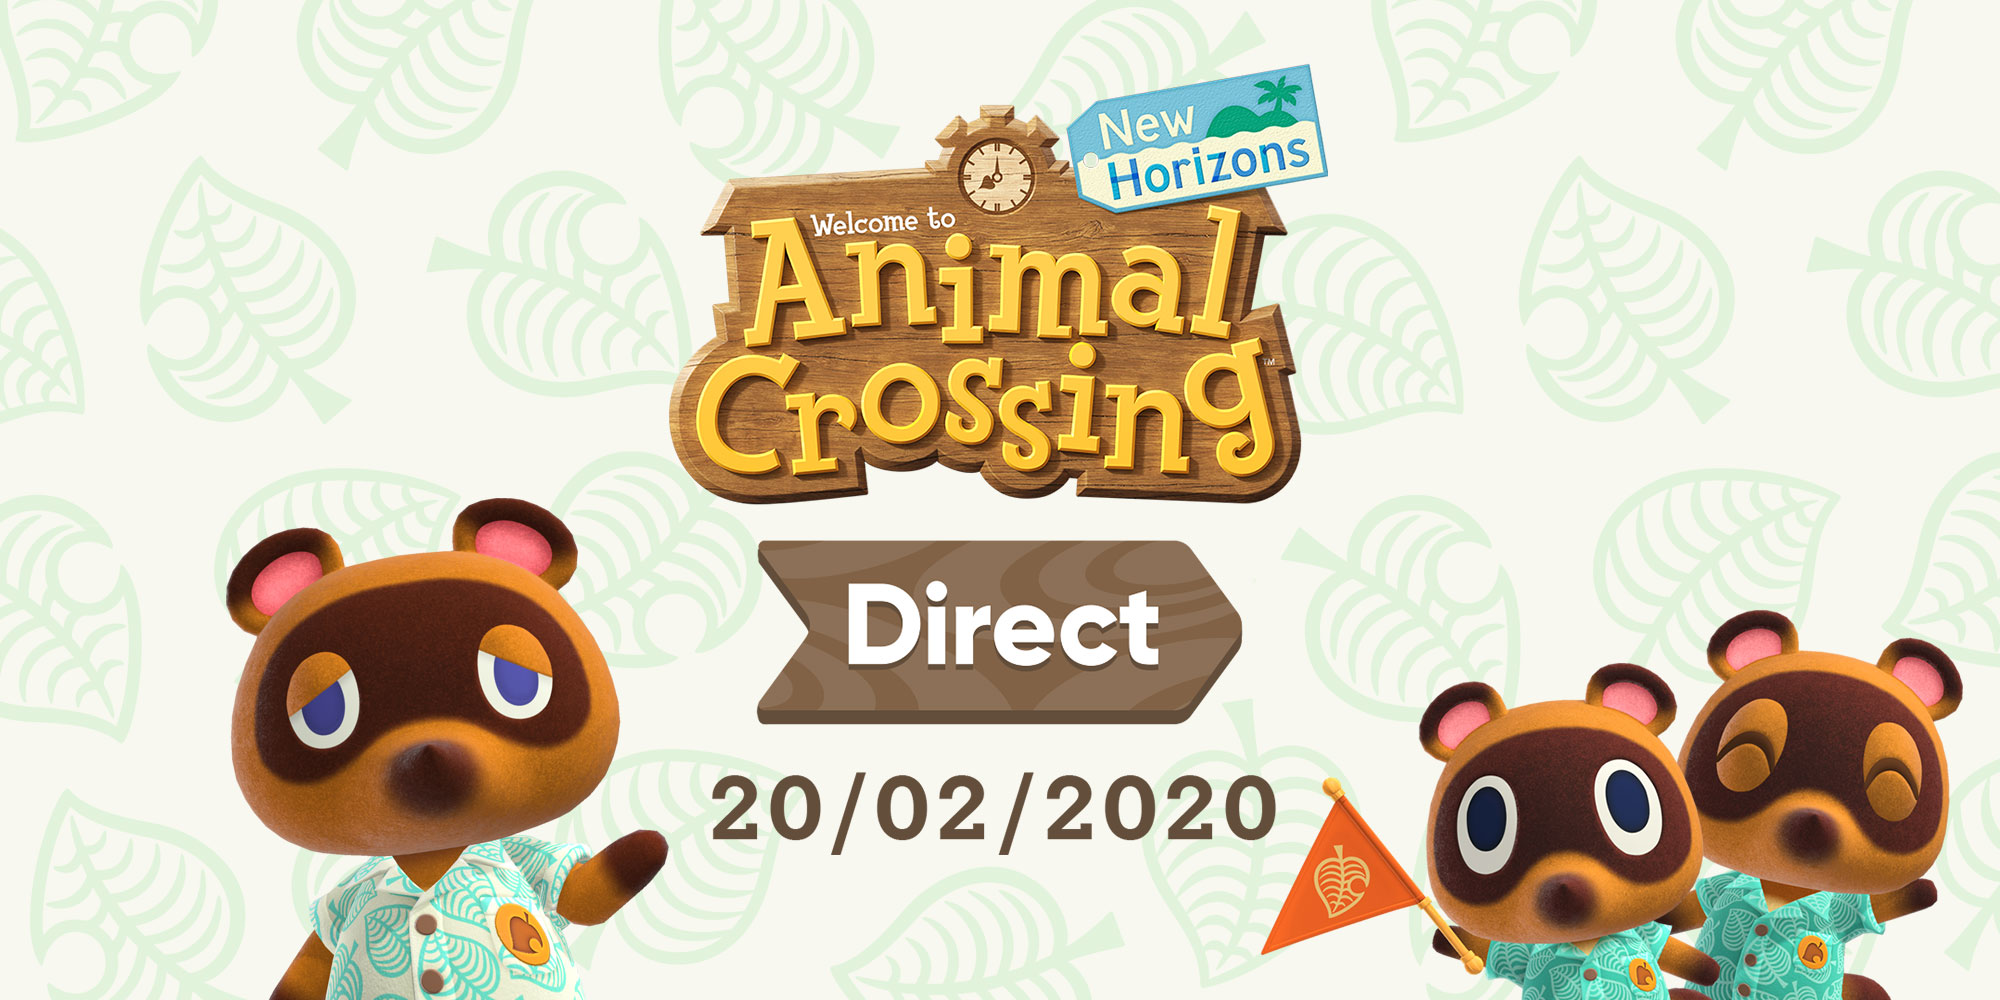 A new Animal Crossing: New Horizons Direct is airing on February 20th!